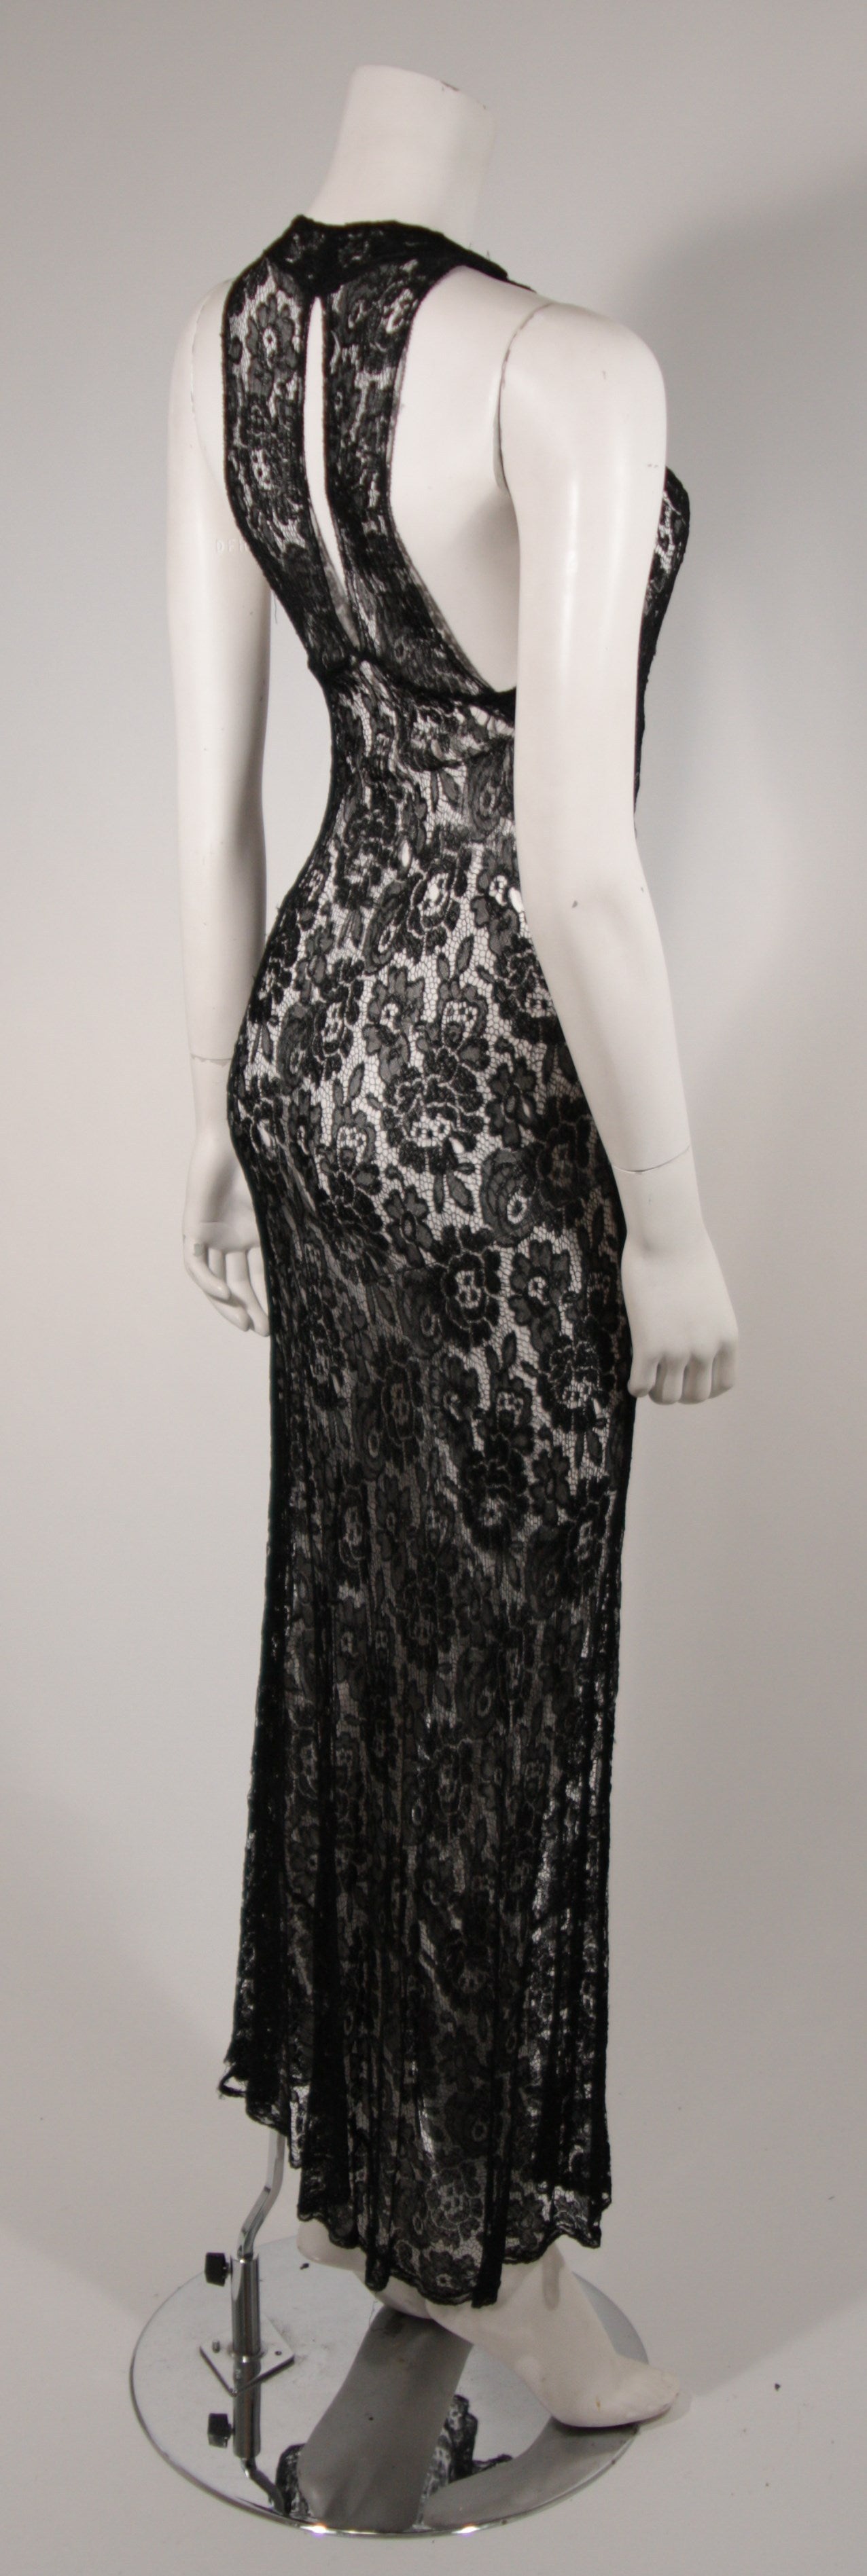 Black Stretch Lace Racer Style Back Gown For Sale 1